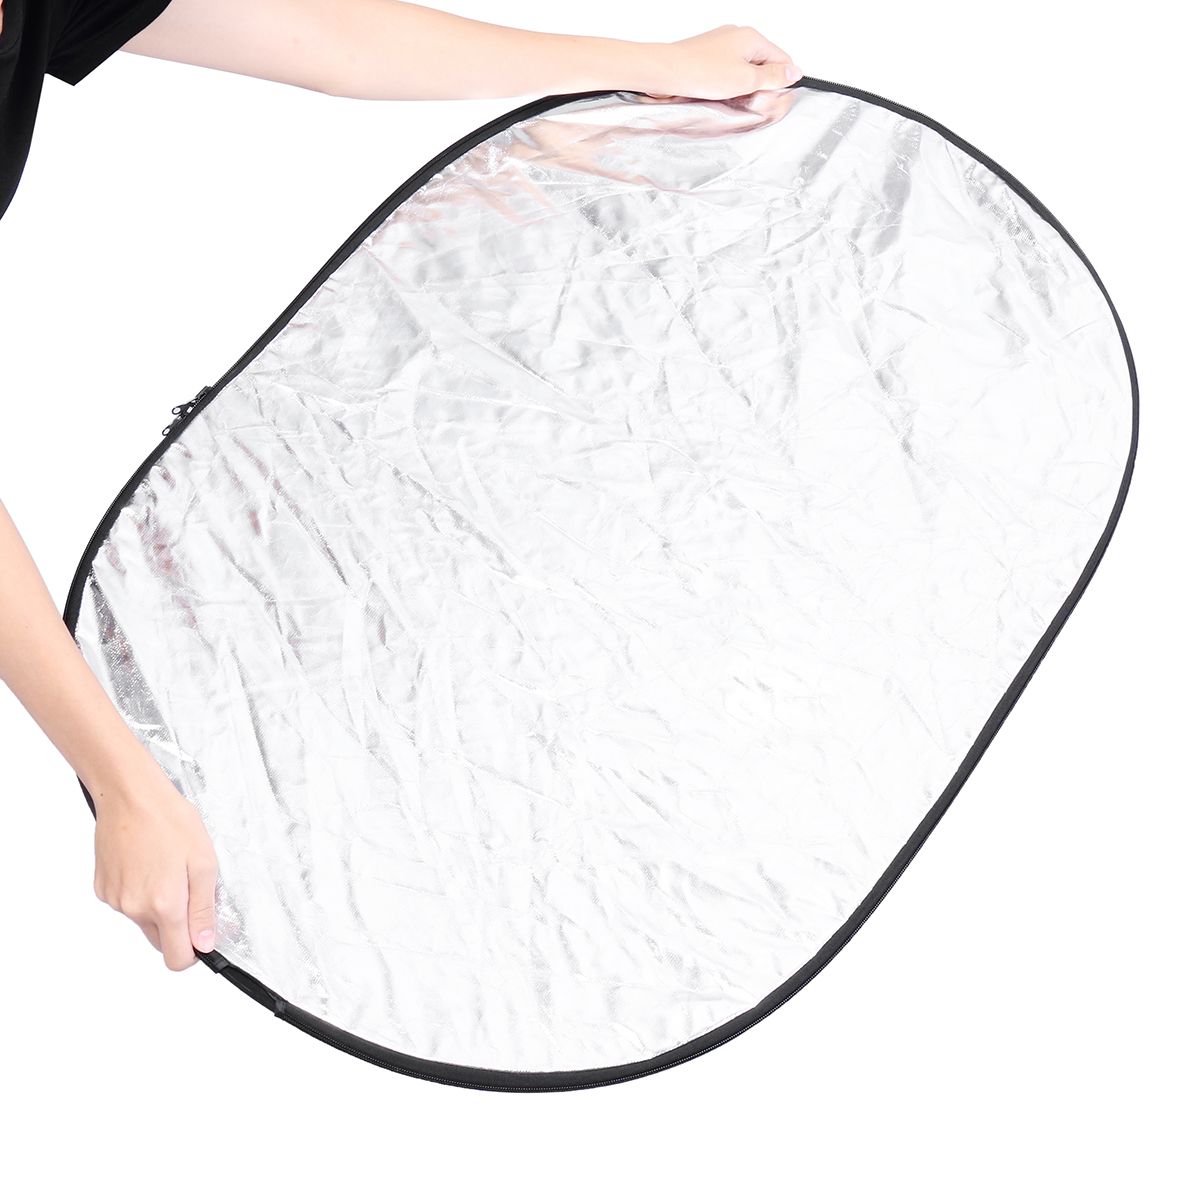 60x90cm-5-in1-Round-Collapsible-Photography-Reflector-Studio-Light-Reflector-Diffuser-Photography-Pr-1714049